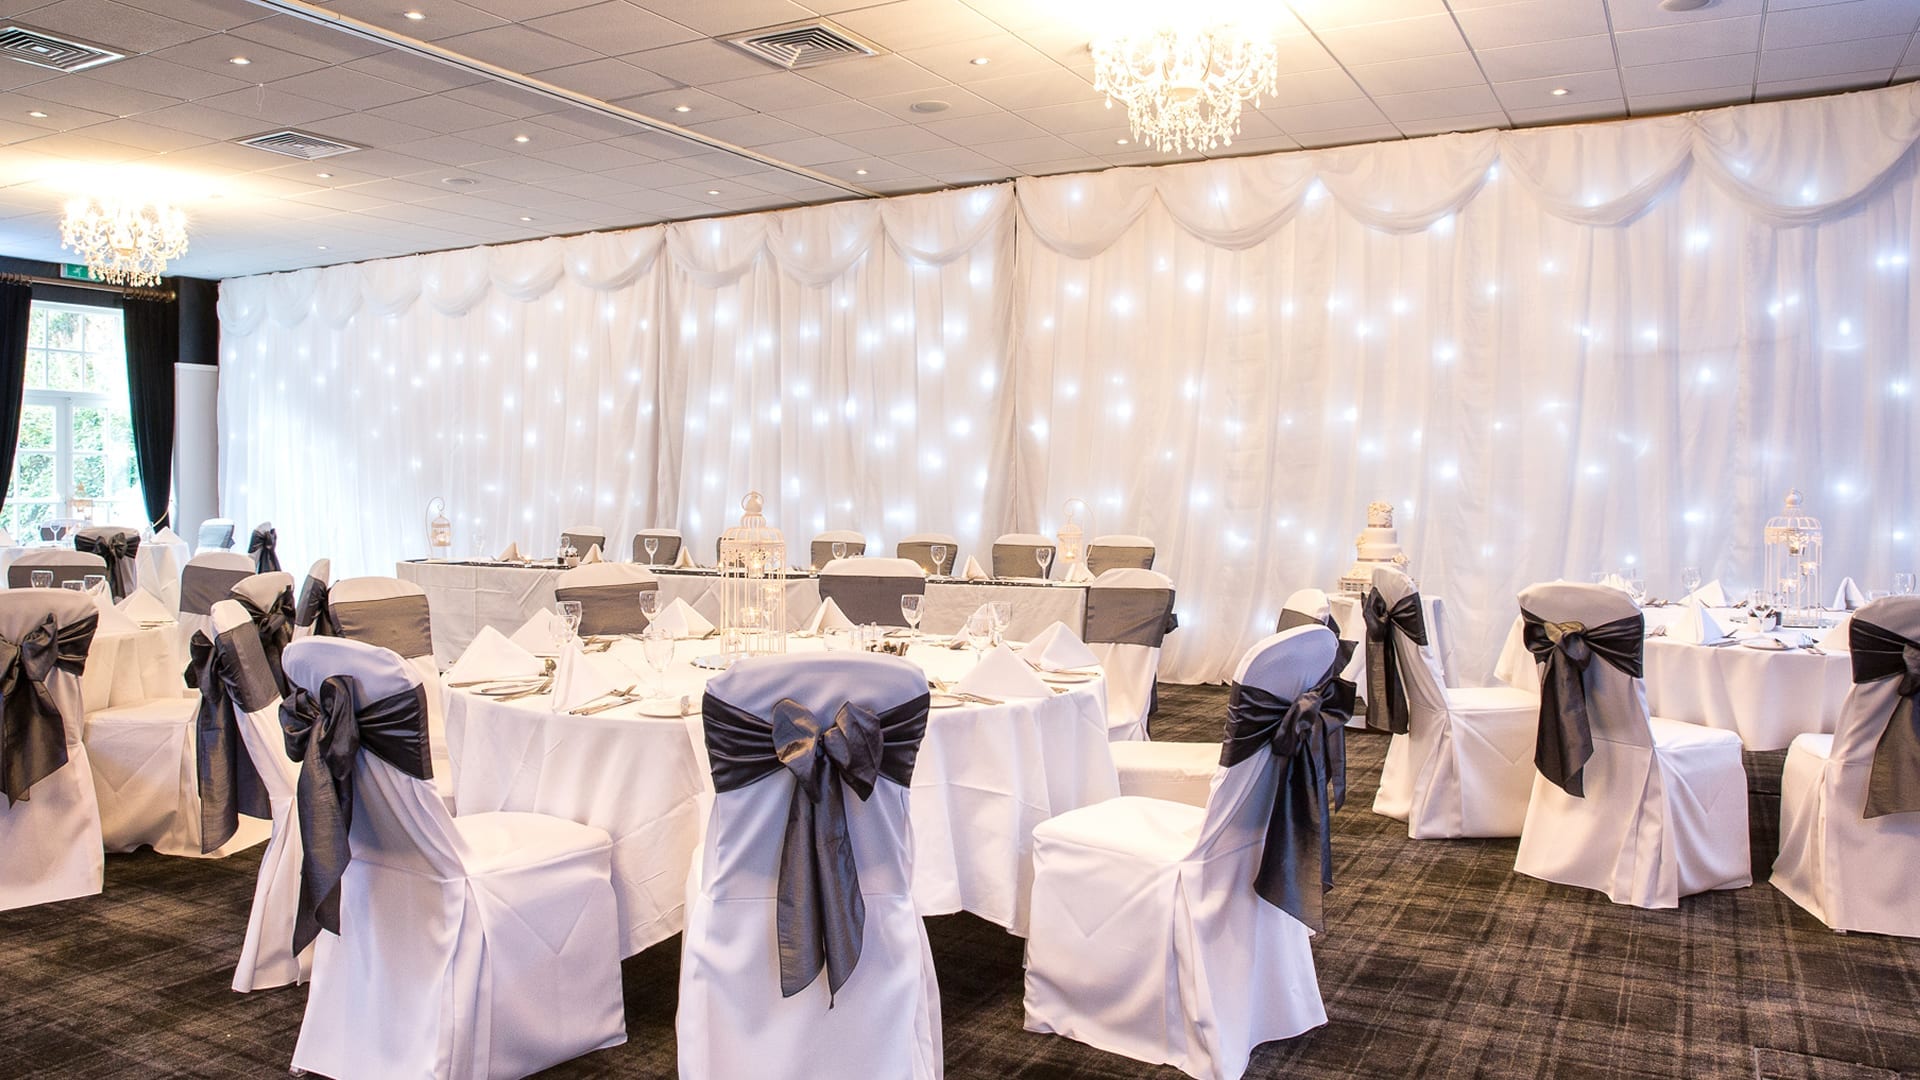 Meldons Suite laid out for a wedding reception